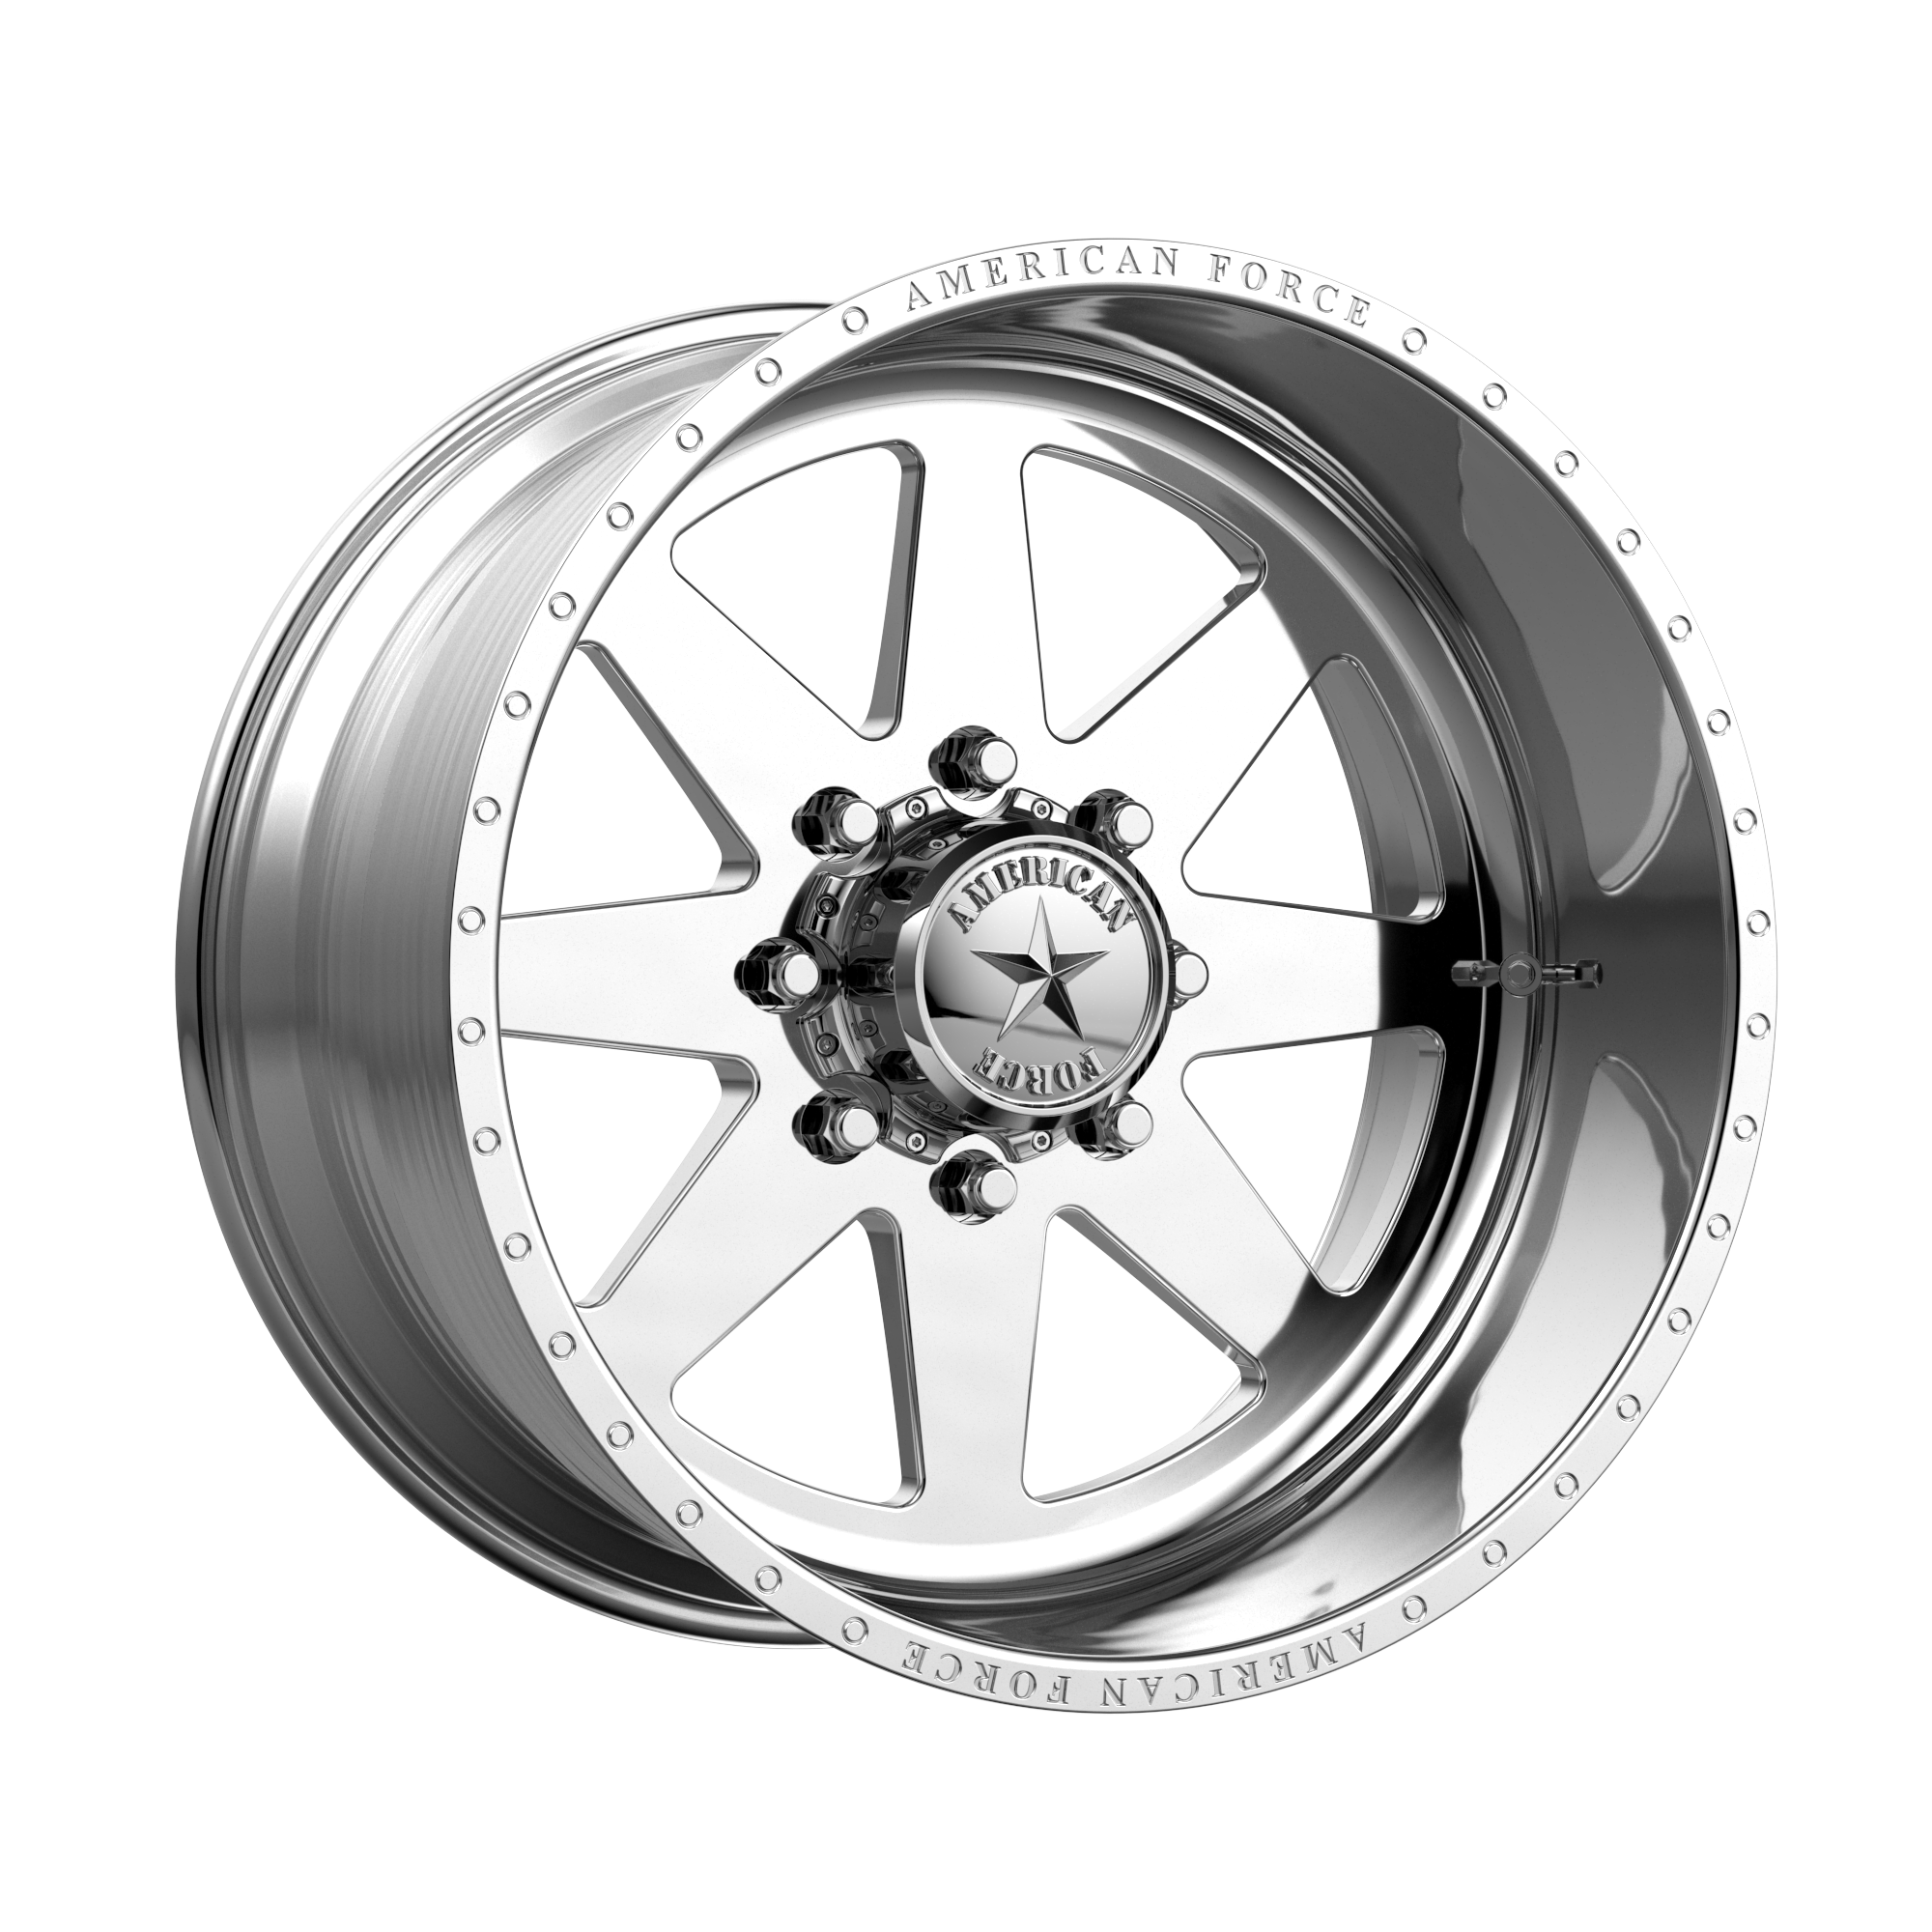 INDEPENDENCE SS 22x16 6x139.70 POLISHED (-73 mm) - Tires and Engine Performance